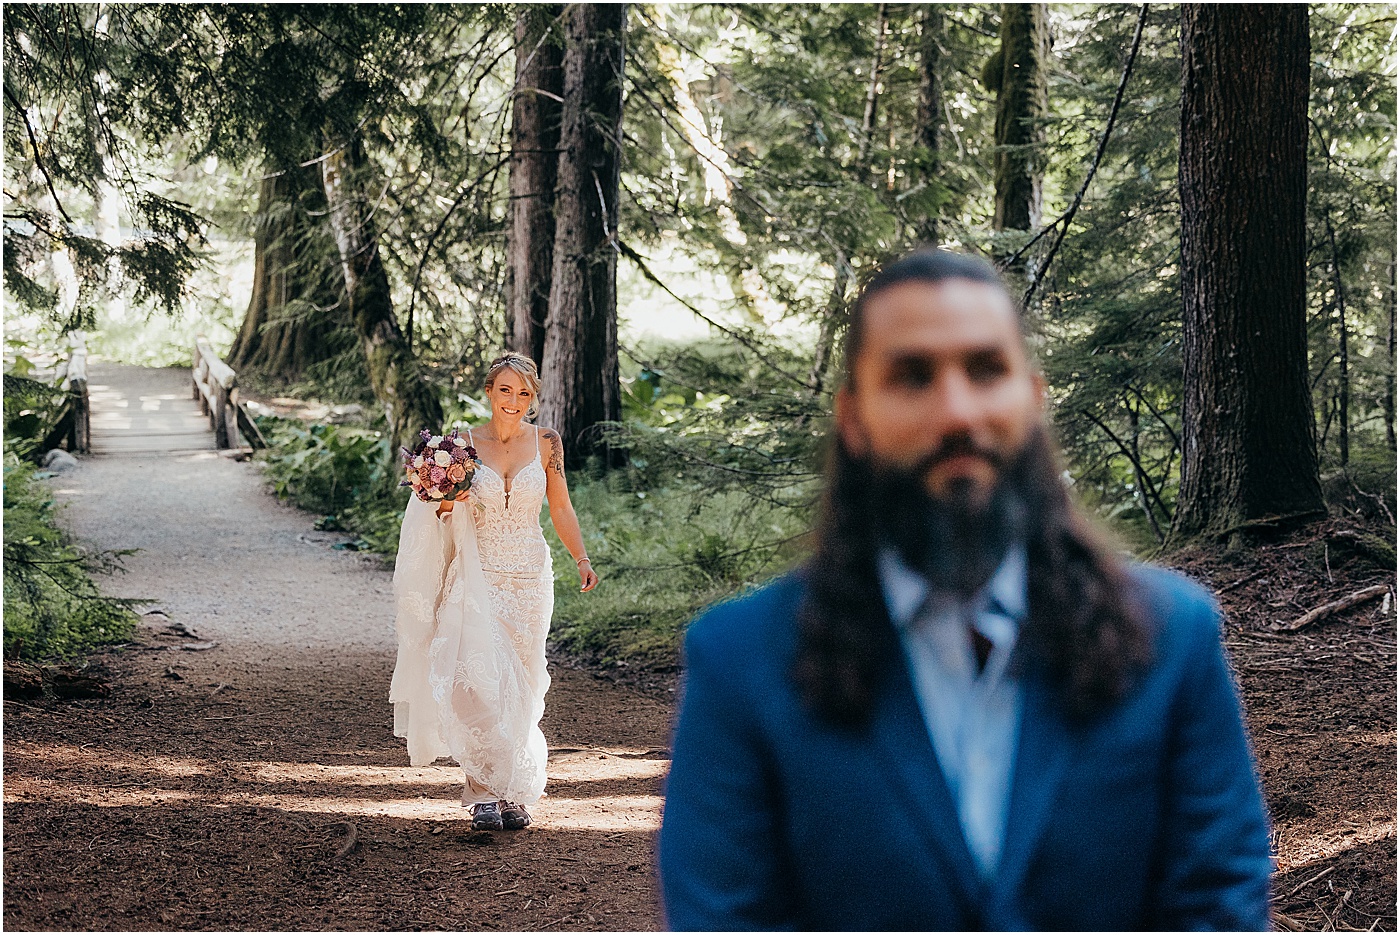 Bride and groom first look | Photo by Megan Montalvo Photography